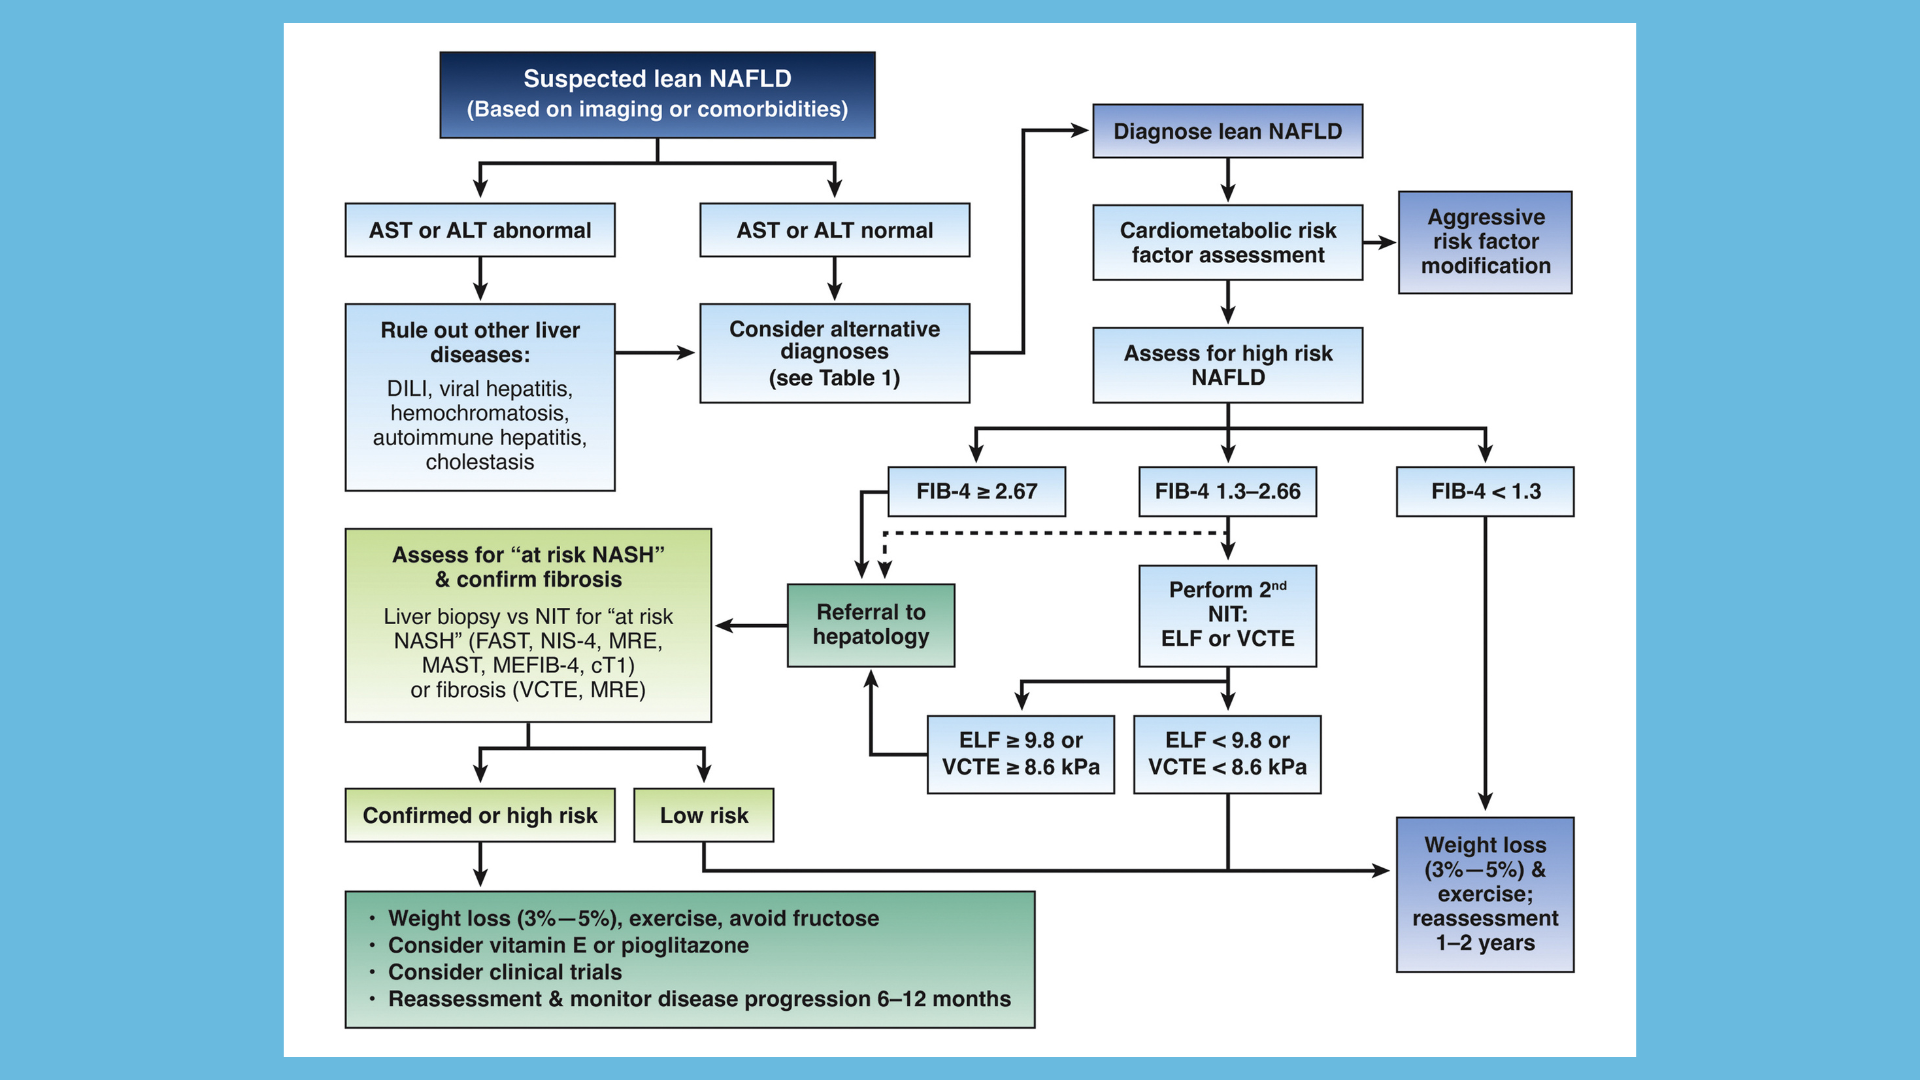 New guidance NAFLD management for lean patients American